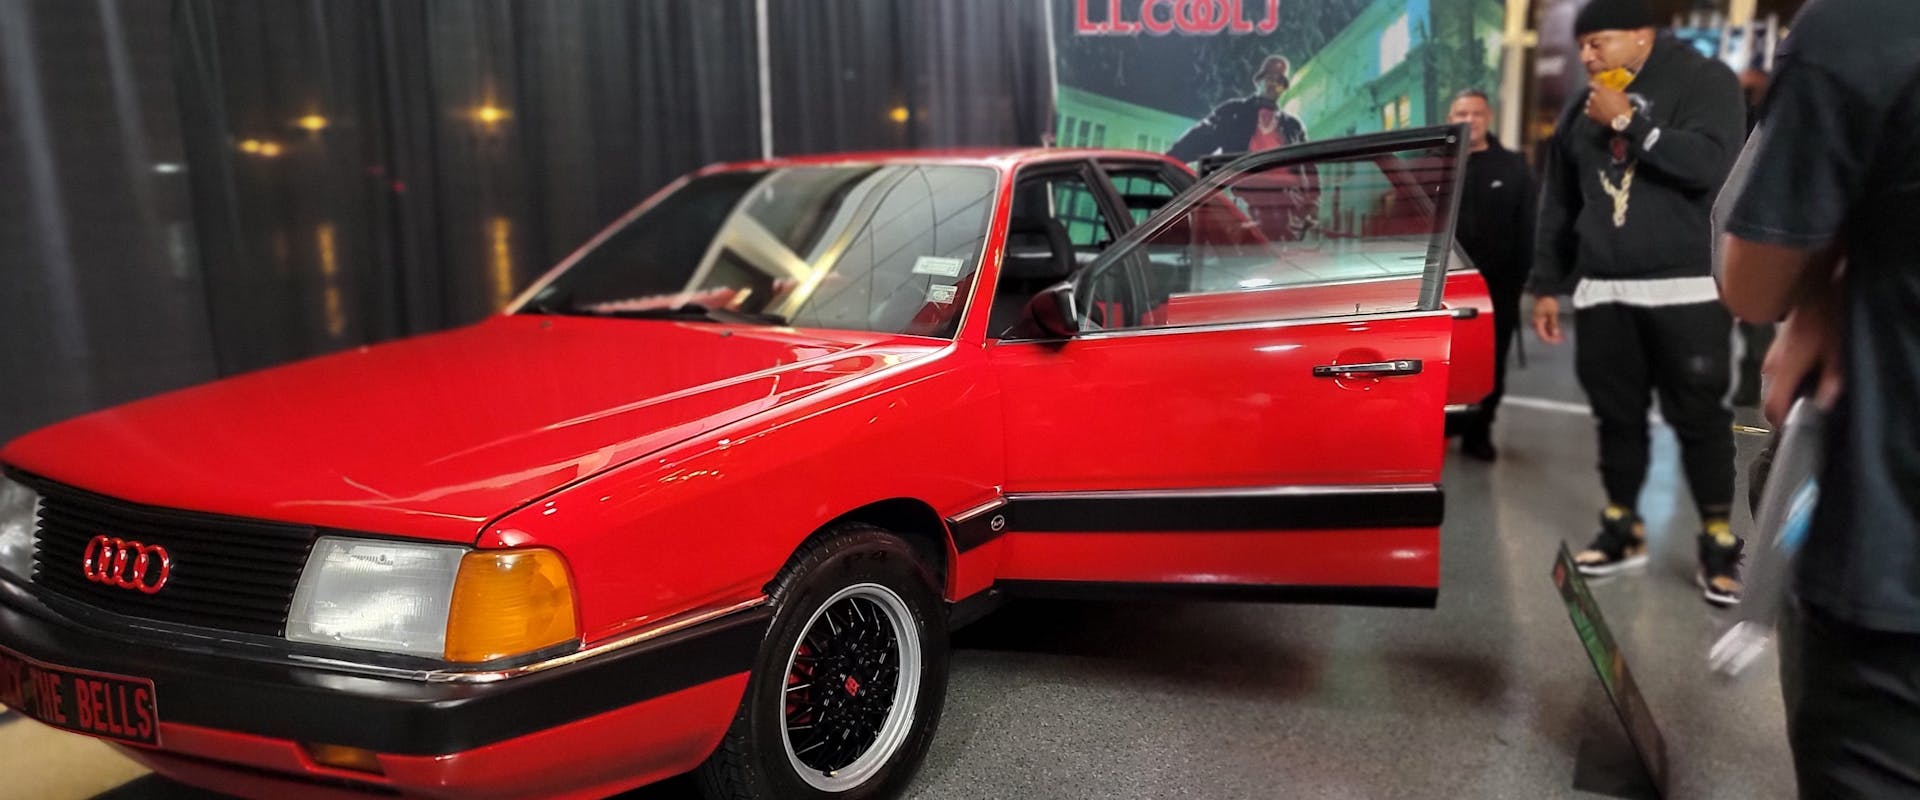 LL COOL J Audi 5000 at Rock and Roll Hall of Fame